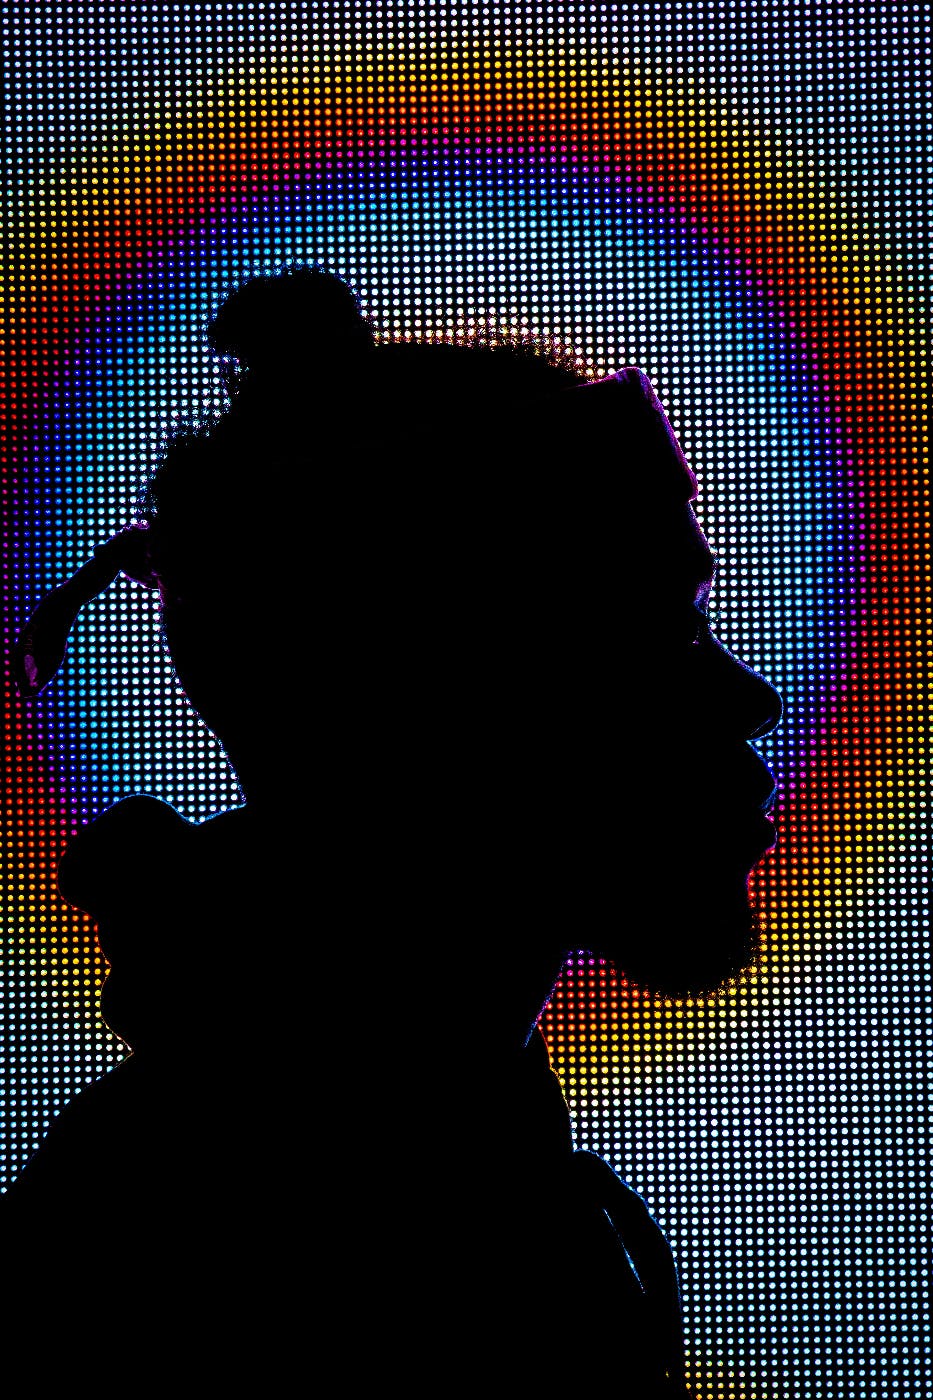 The silhouette of a man against a digital background